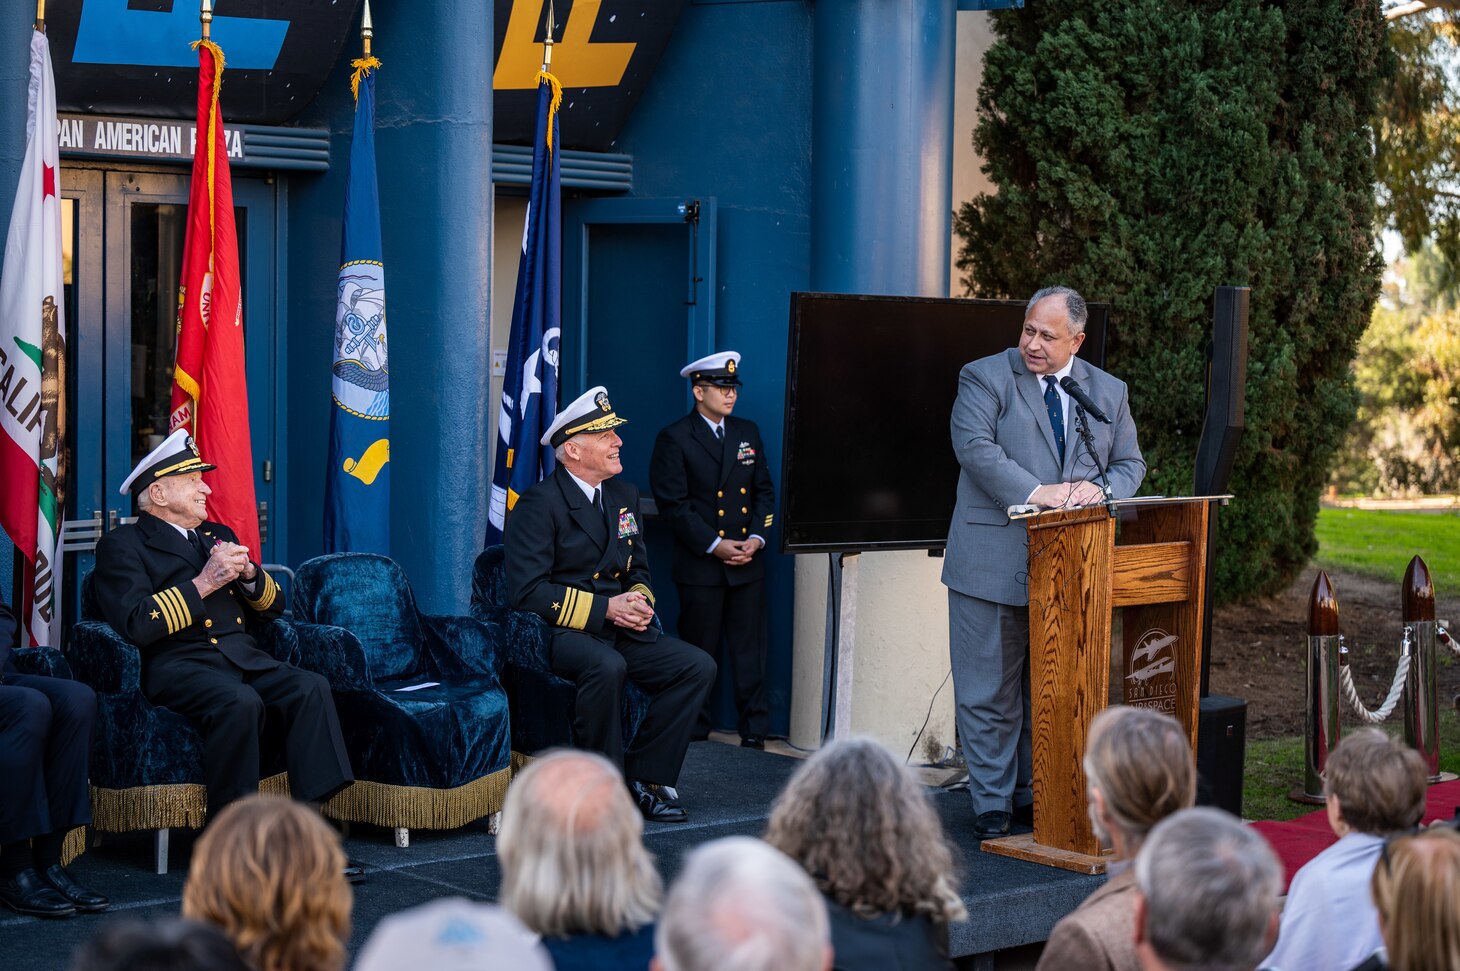 SAN DIEGO (Jan. 20, 2023) — Secretary of the Navy Carlos Del Toro delivers remarks during a ceremony awarding retired U.S. Navy Capt. E. Royce Williams, left, with a Navy Cross Jan. 20. Del Toro was in San Diego for various fleet engagements, awards ceremonies and ship events